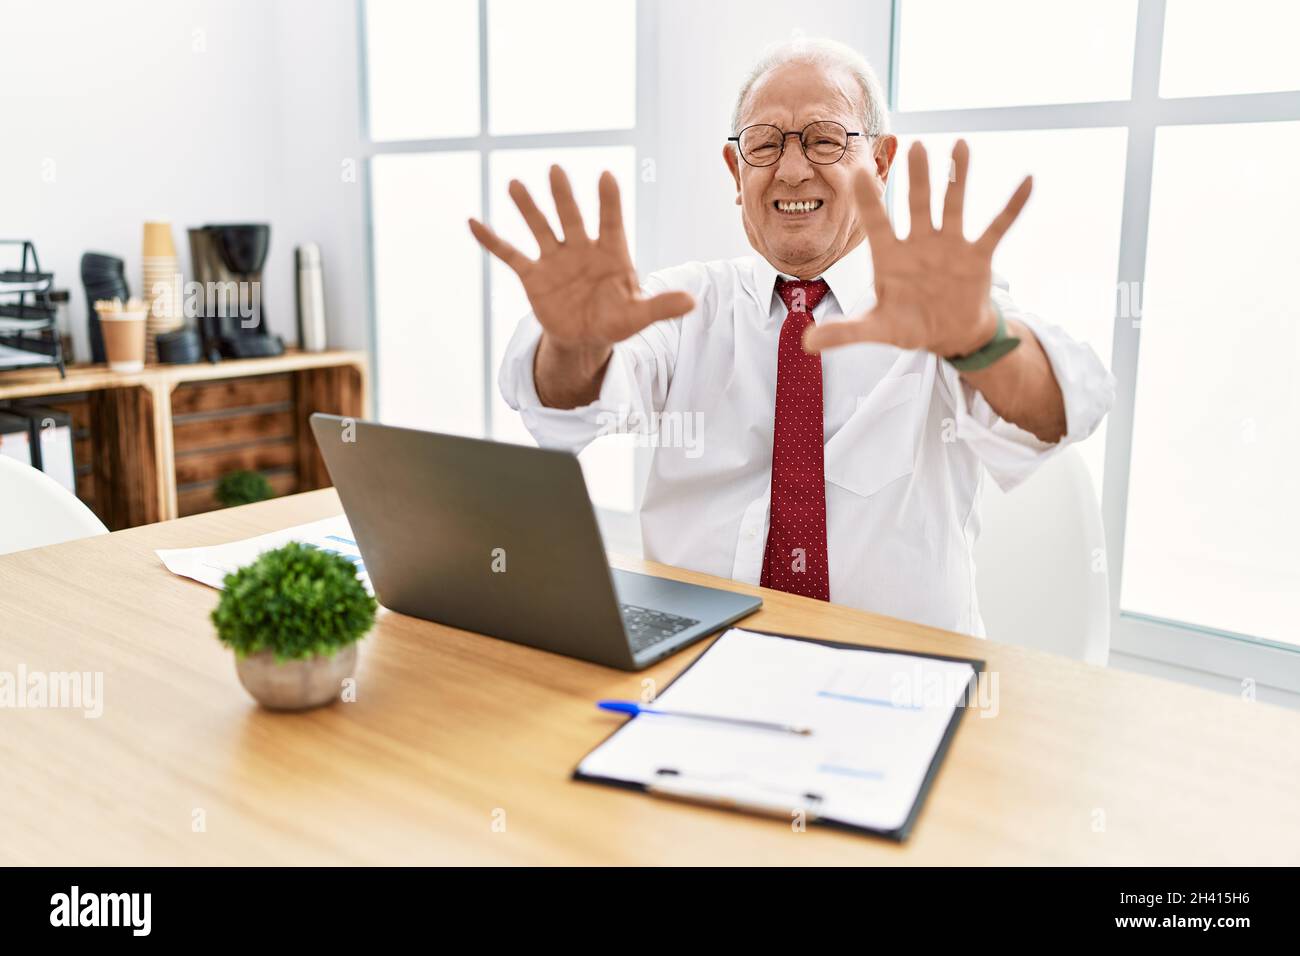 Senior man working at the office using computer laptop doing stop gesture with hands palms, angry and frustration expression Stock Photo